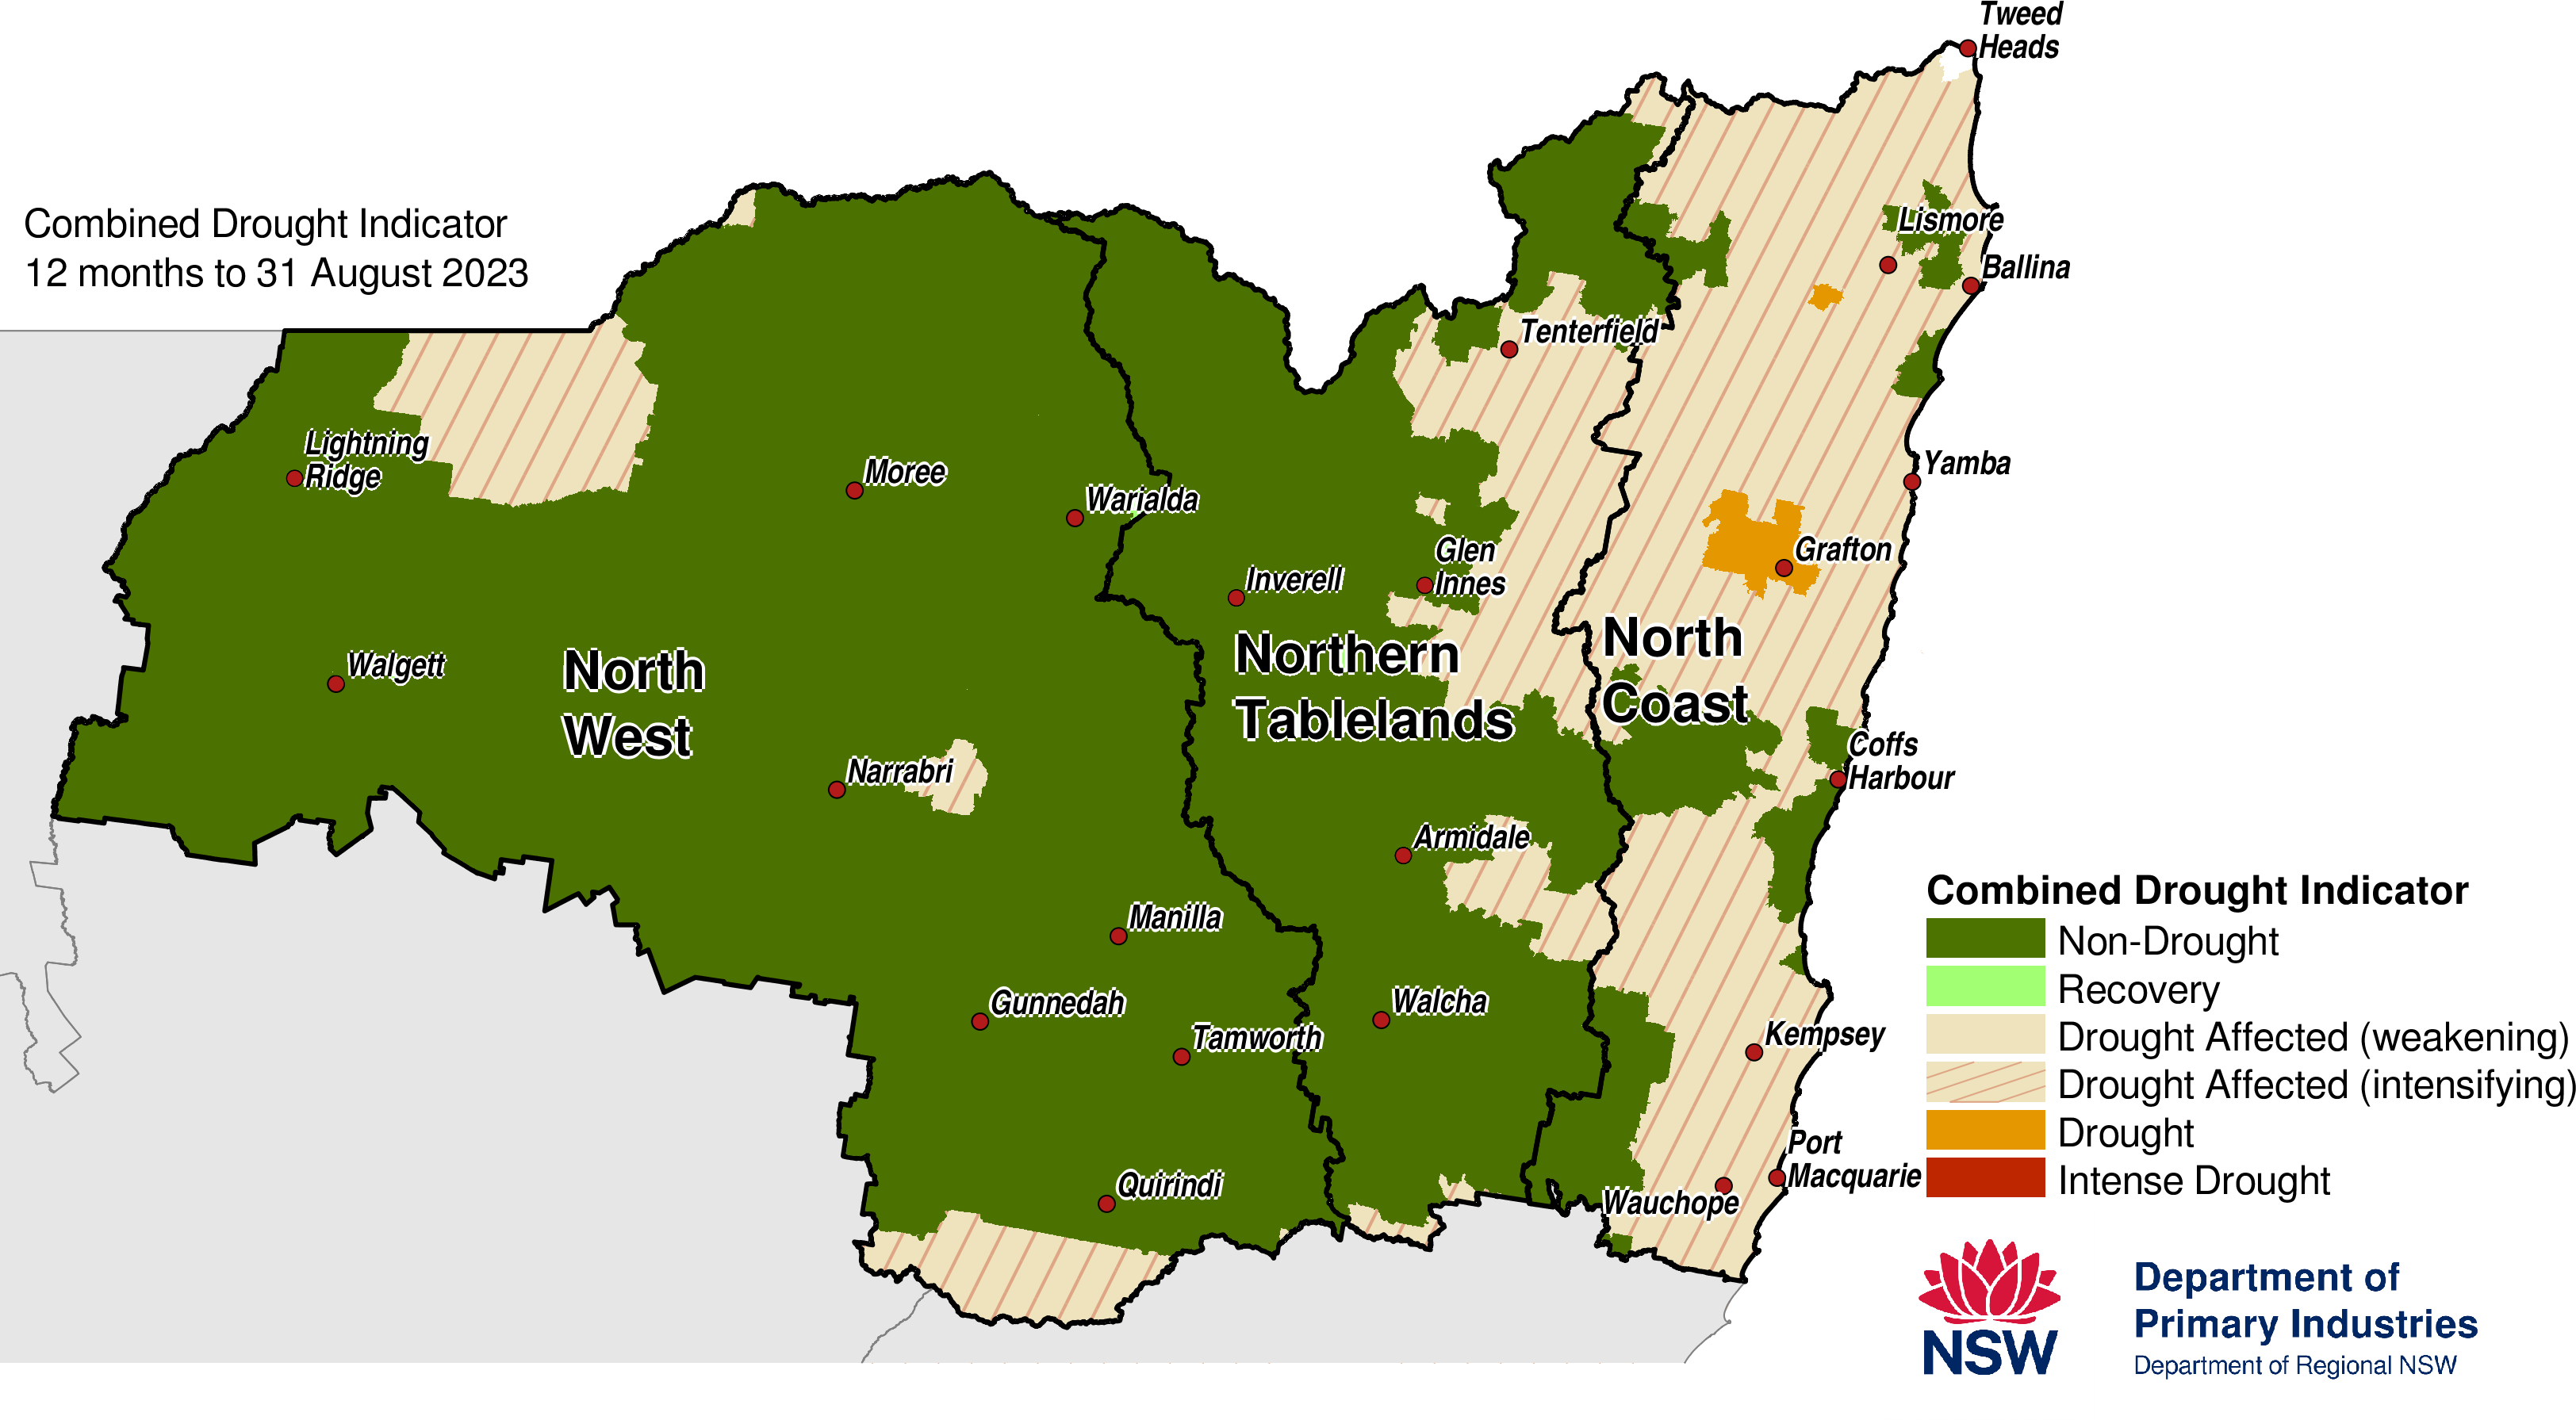 Figure 24. Combined Drought Indicator for the North West, Northern Tableland and North Coast regions